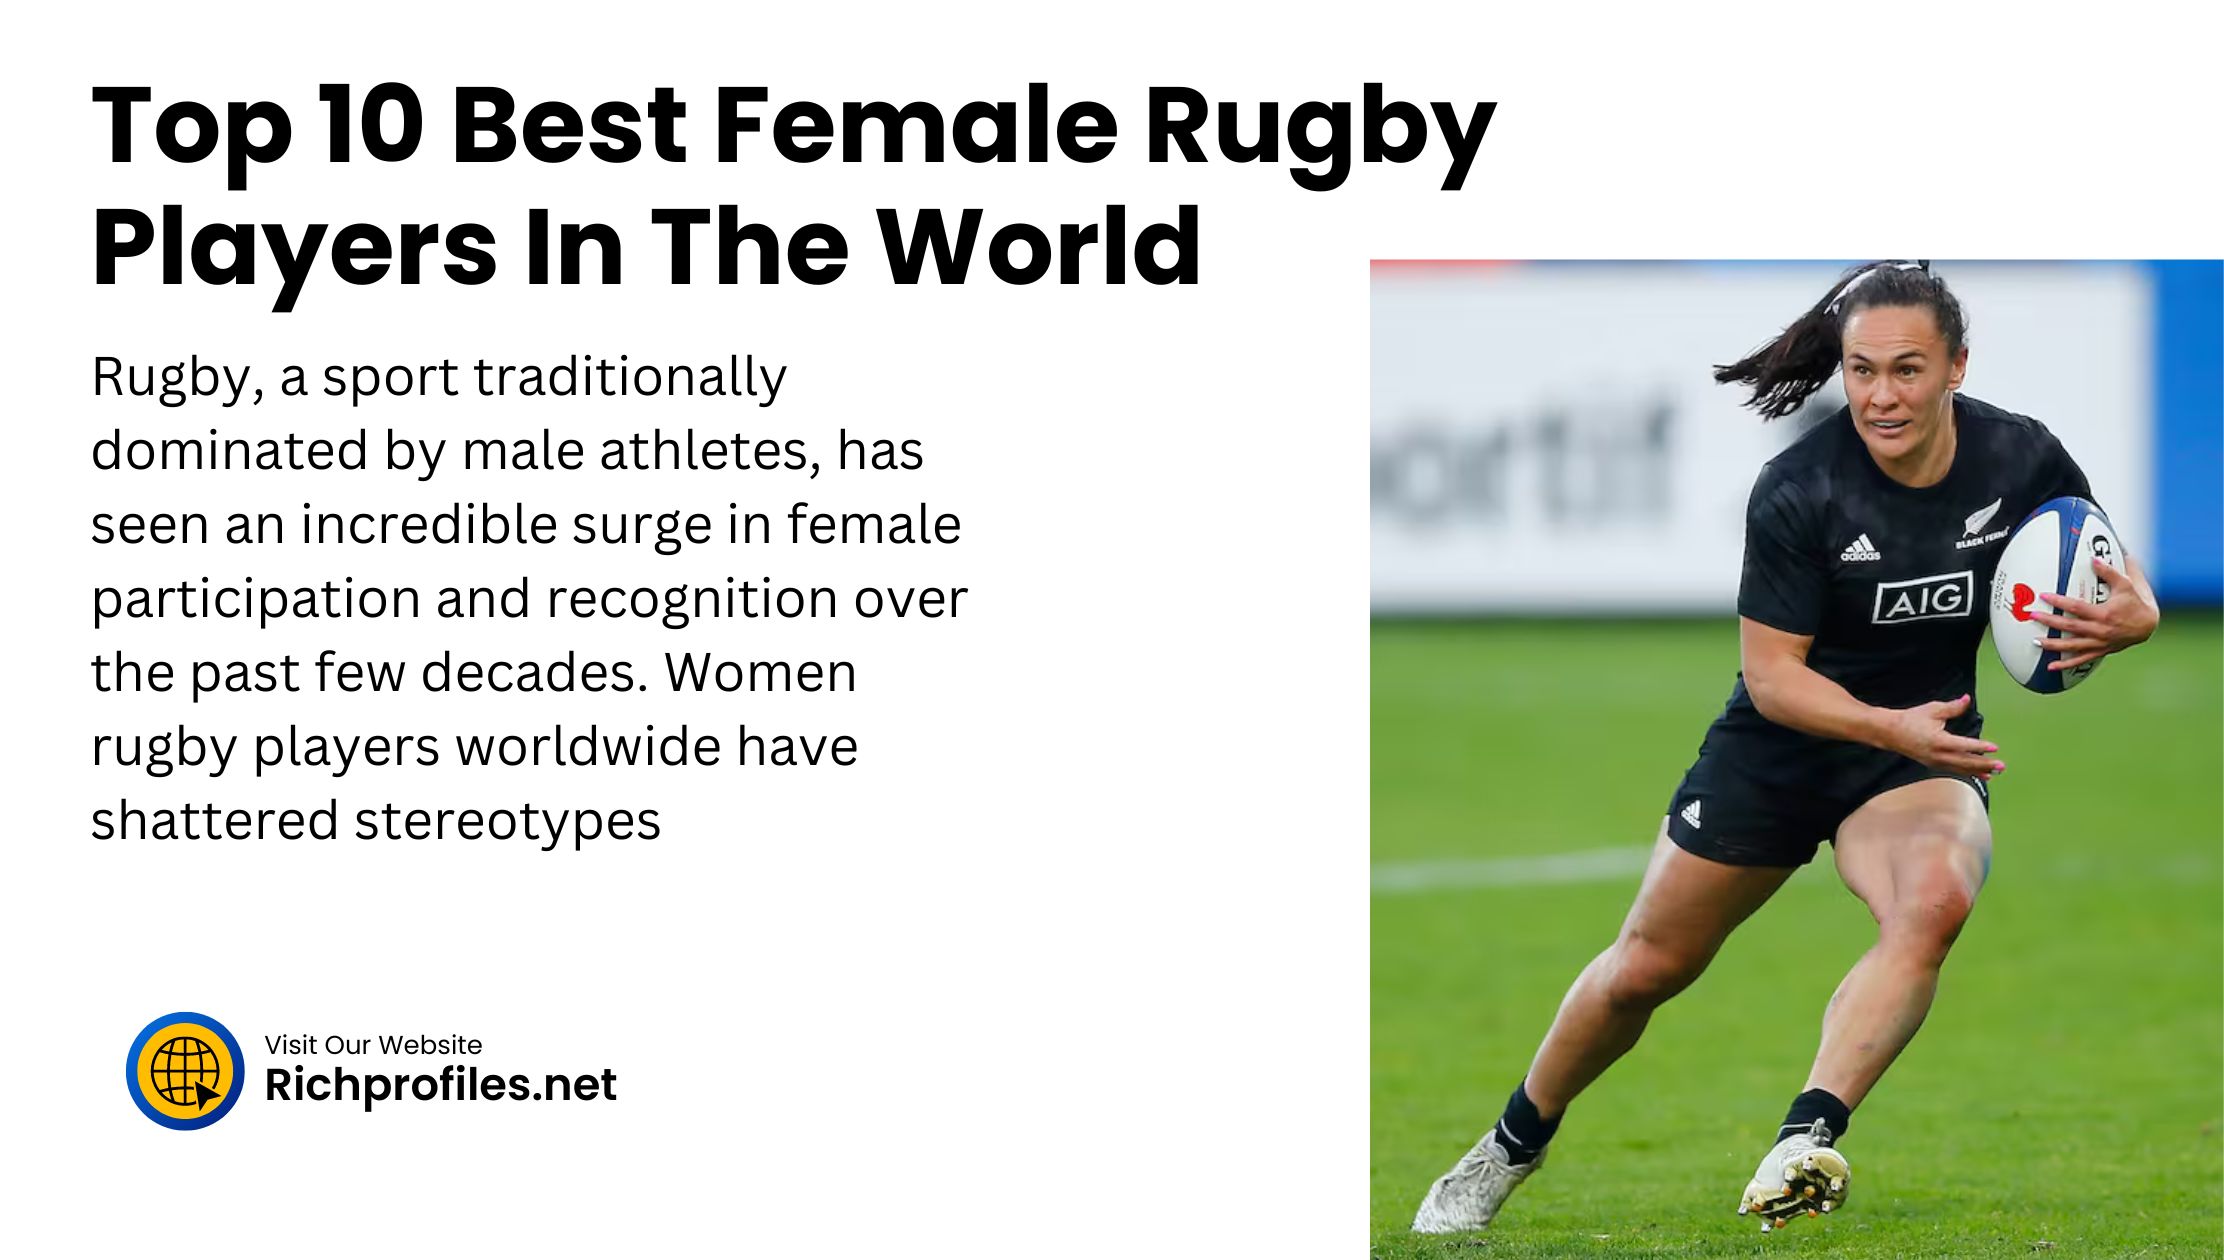 Top 10 Best Female Rugby Players In The World